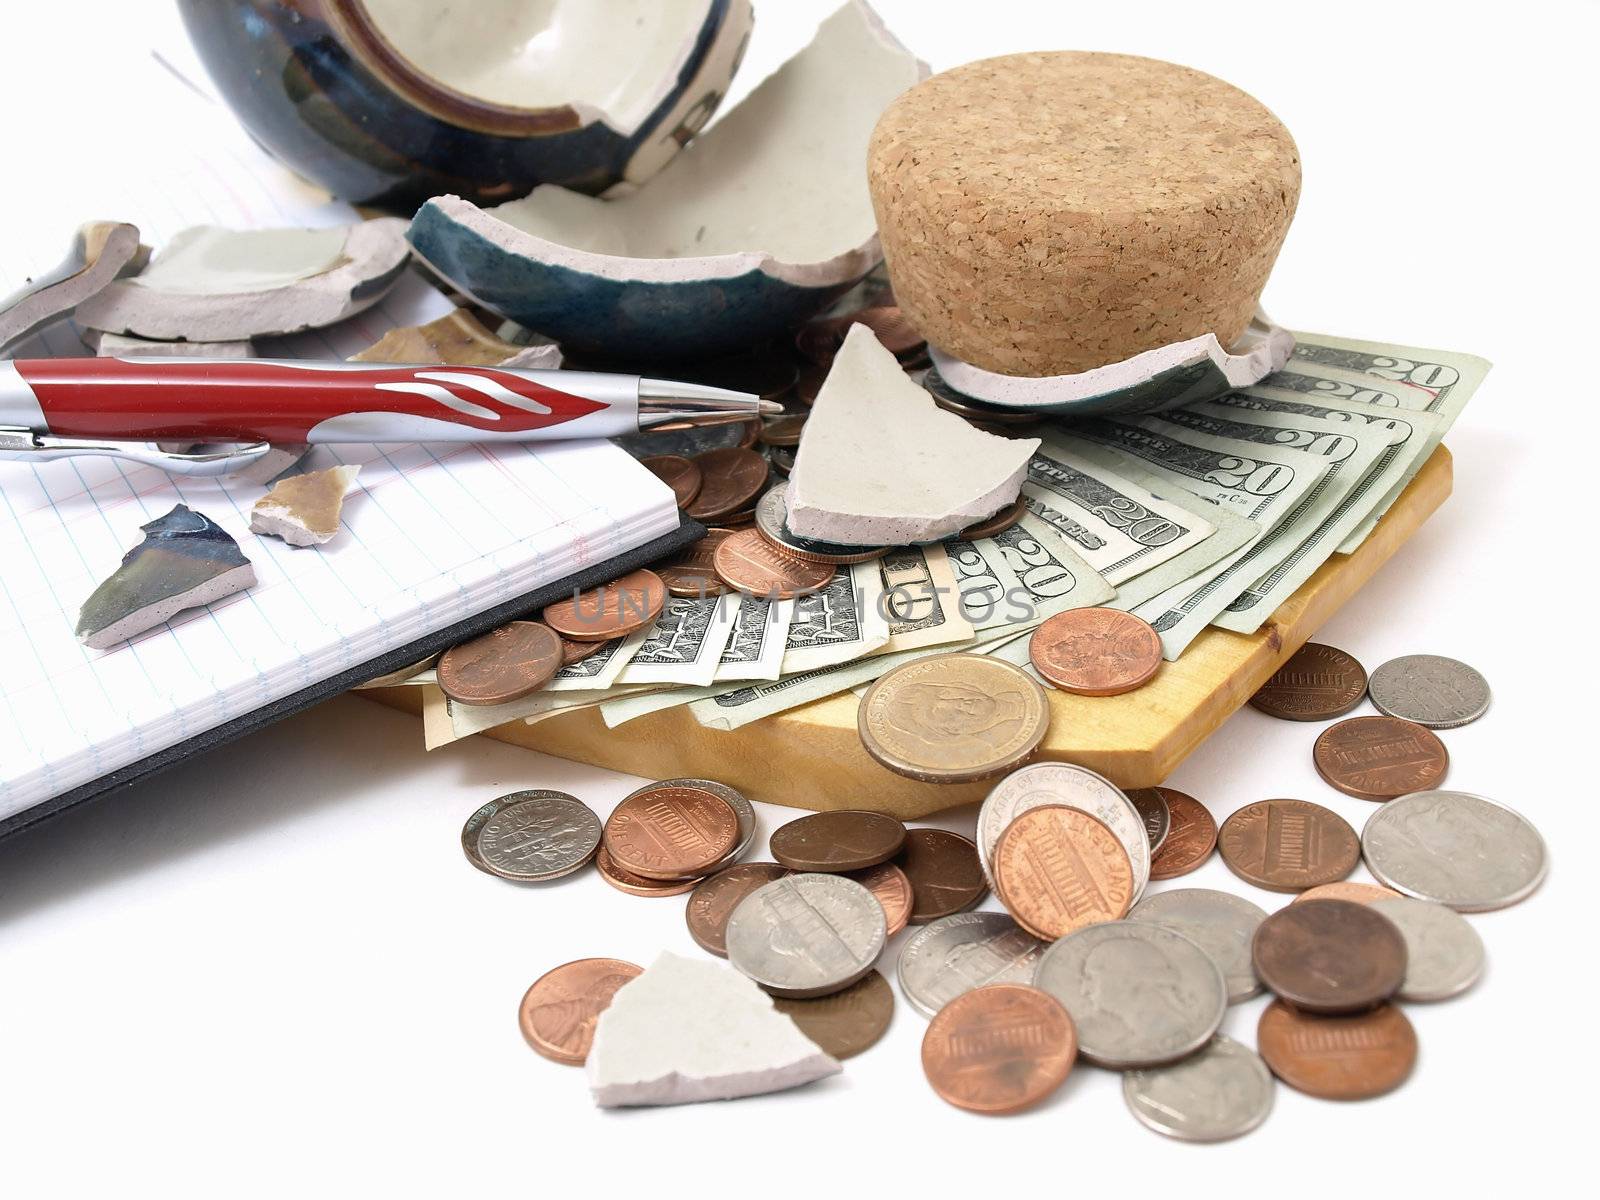 An open ledger and pen next to a broken ceramic bank on a pile of loose United States coins and currency.